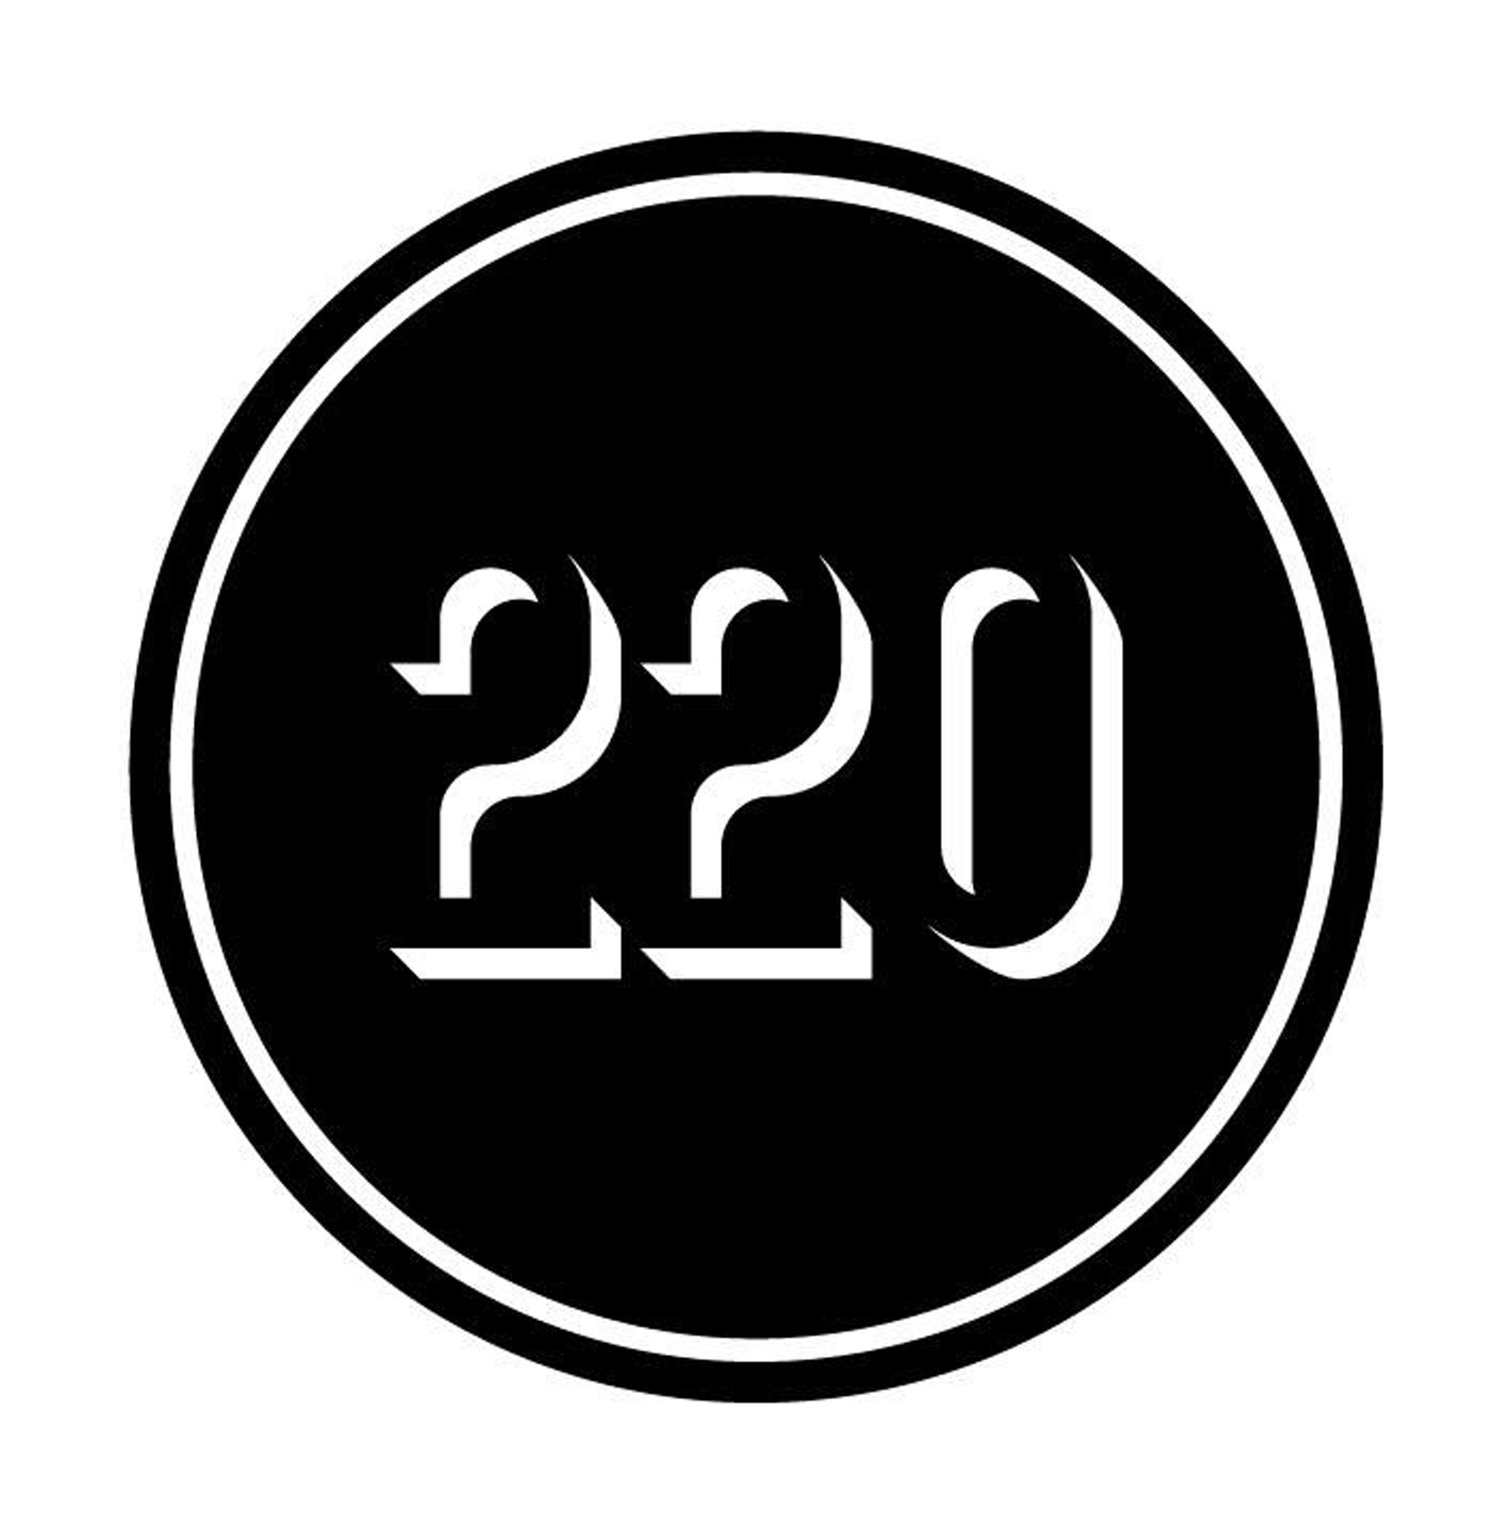 COLLECTIVE 220